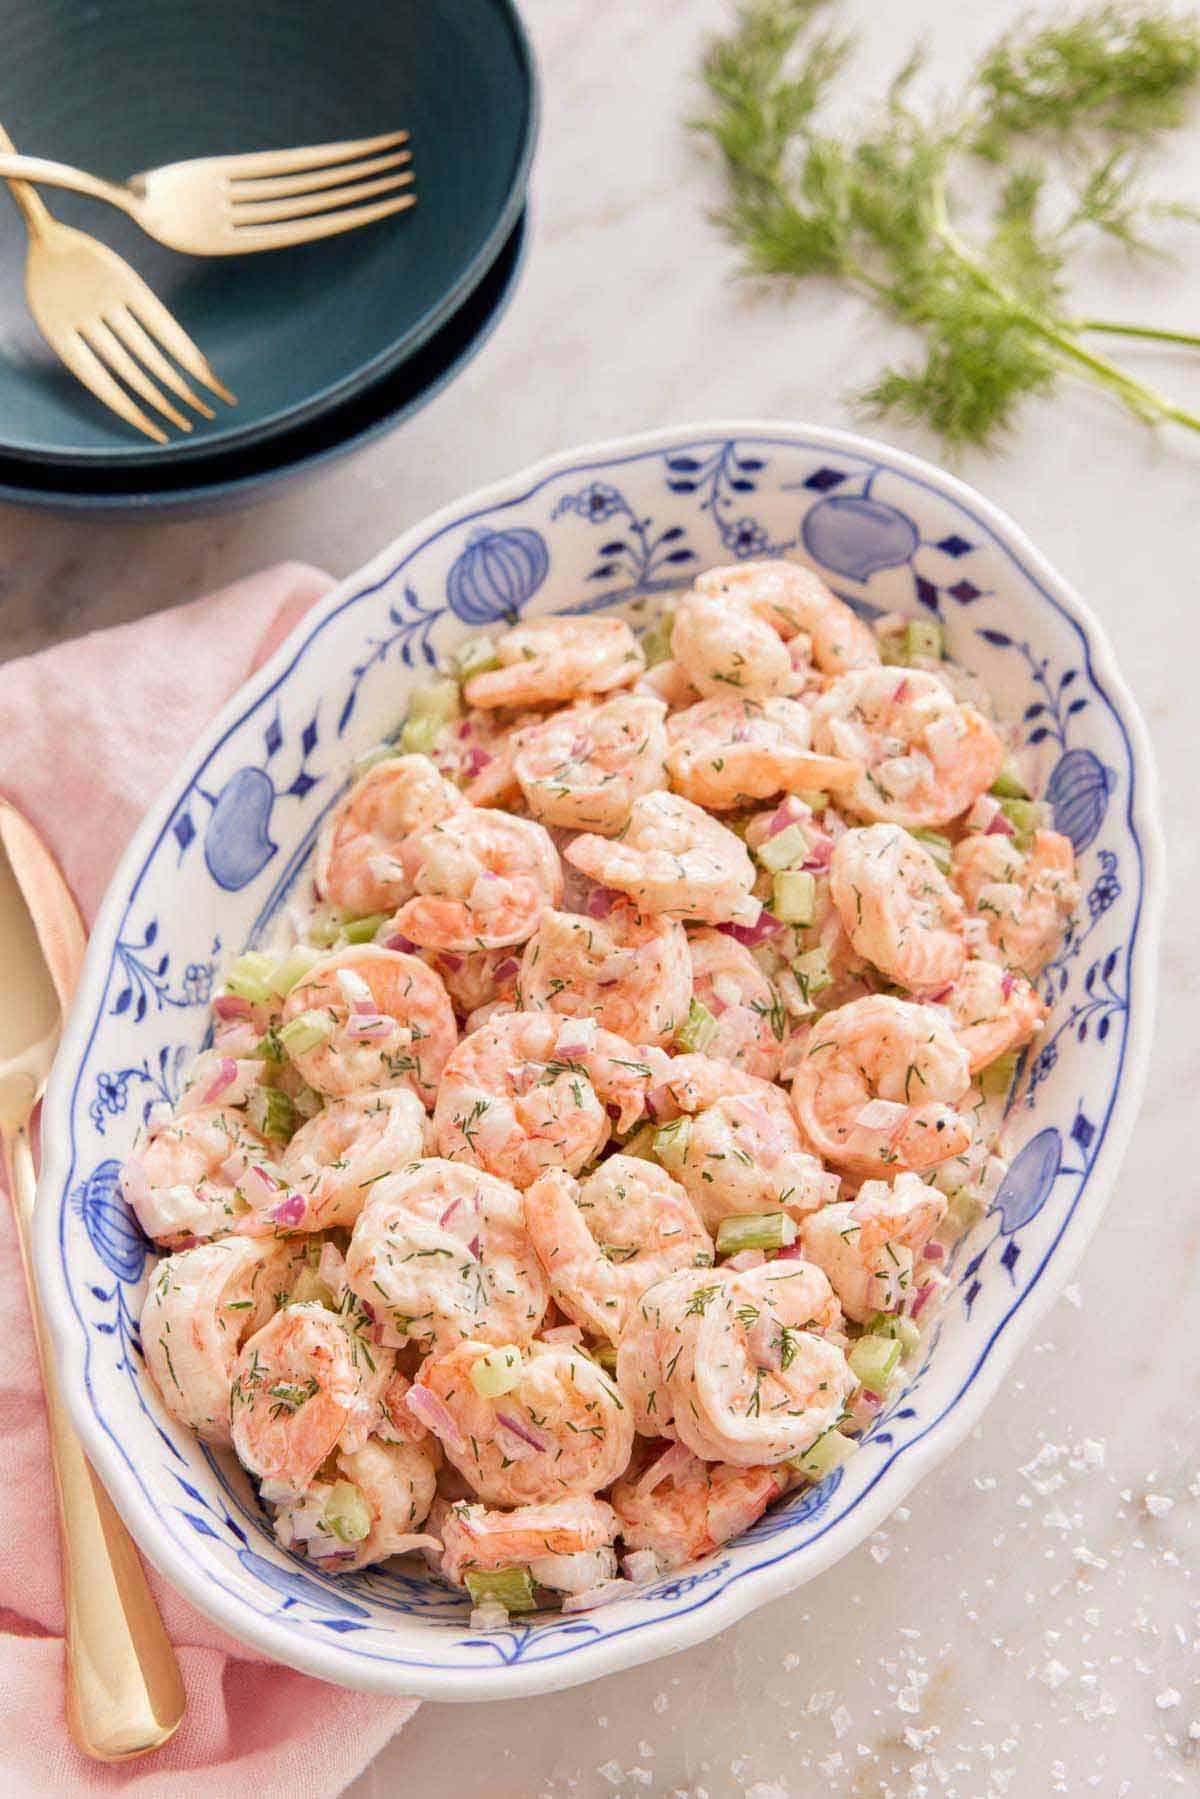 Overhead view of an oval platter of shrimp salad with some dill and stacked bowls and forks in the background.